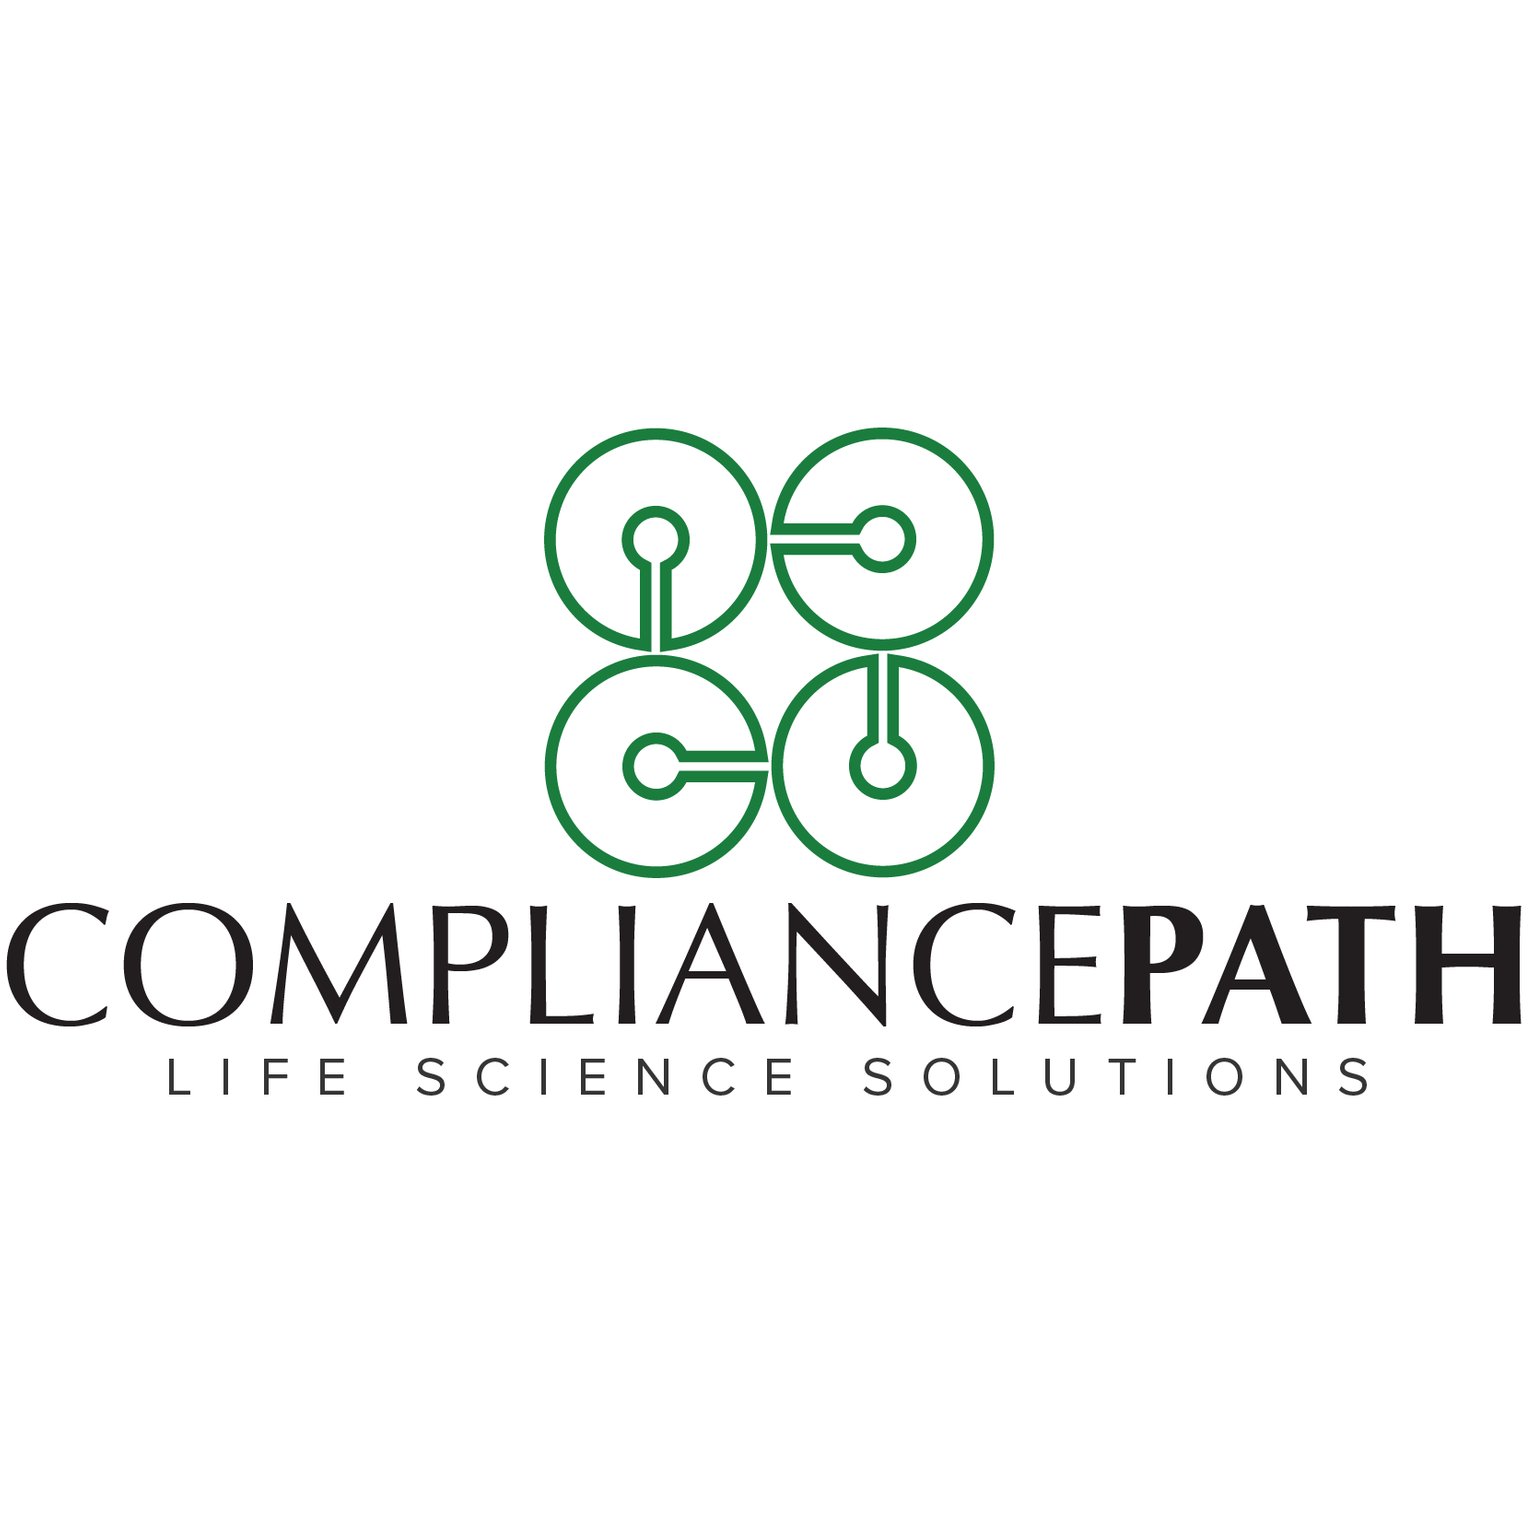 CompliancePath Ltd is a trusted partner in IT Governance & Software Assurance. US & EU GxP, Health IT, Data Privacy, and NHS Directive solutions.